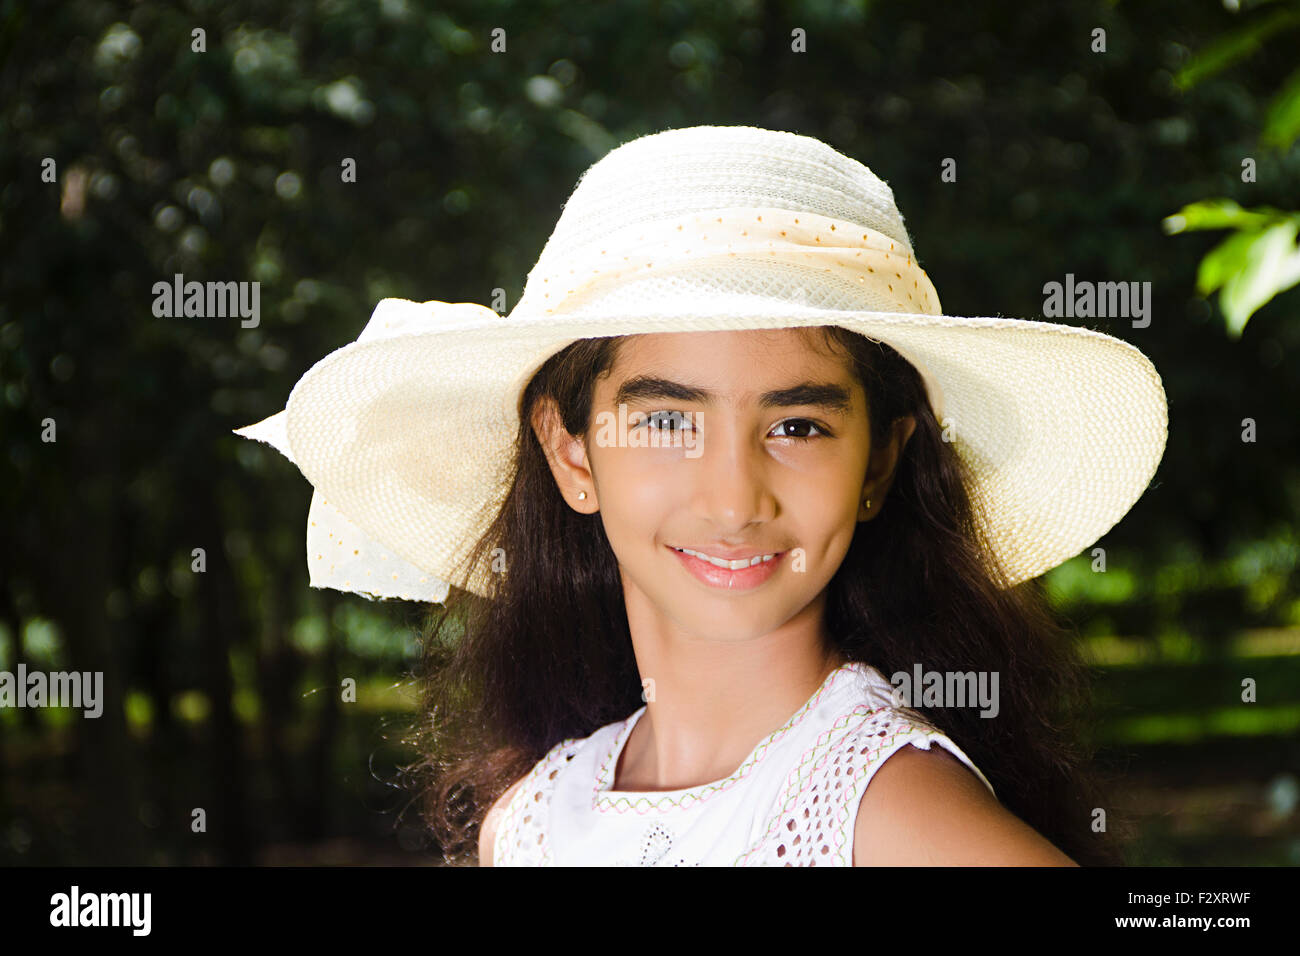 Casual Attire; Casual Clothes; Childhood; Cowboy Hats; Creative Ideas; Focus On Foregrounds; Head and Shoulder; Head and Shoulders; Self Assured; Self Confidence; Self Confident;Asia; Asian; Asians; India; Indian; Indians Stock Photo